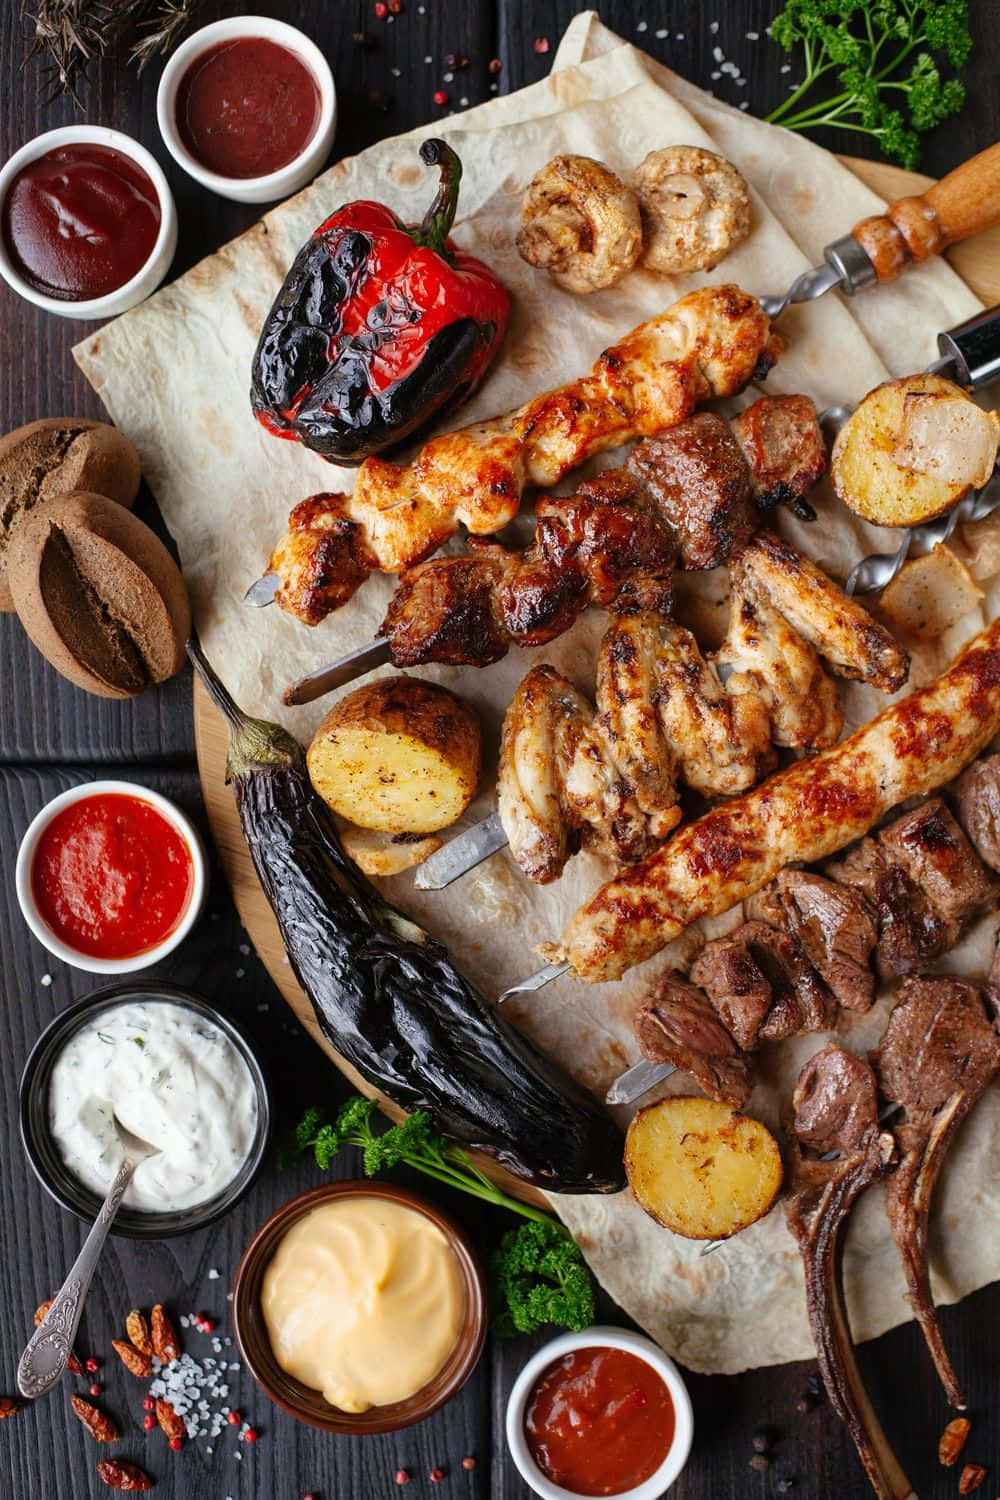 A Plate Of Grilled Meats And Vegetables